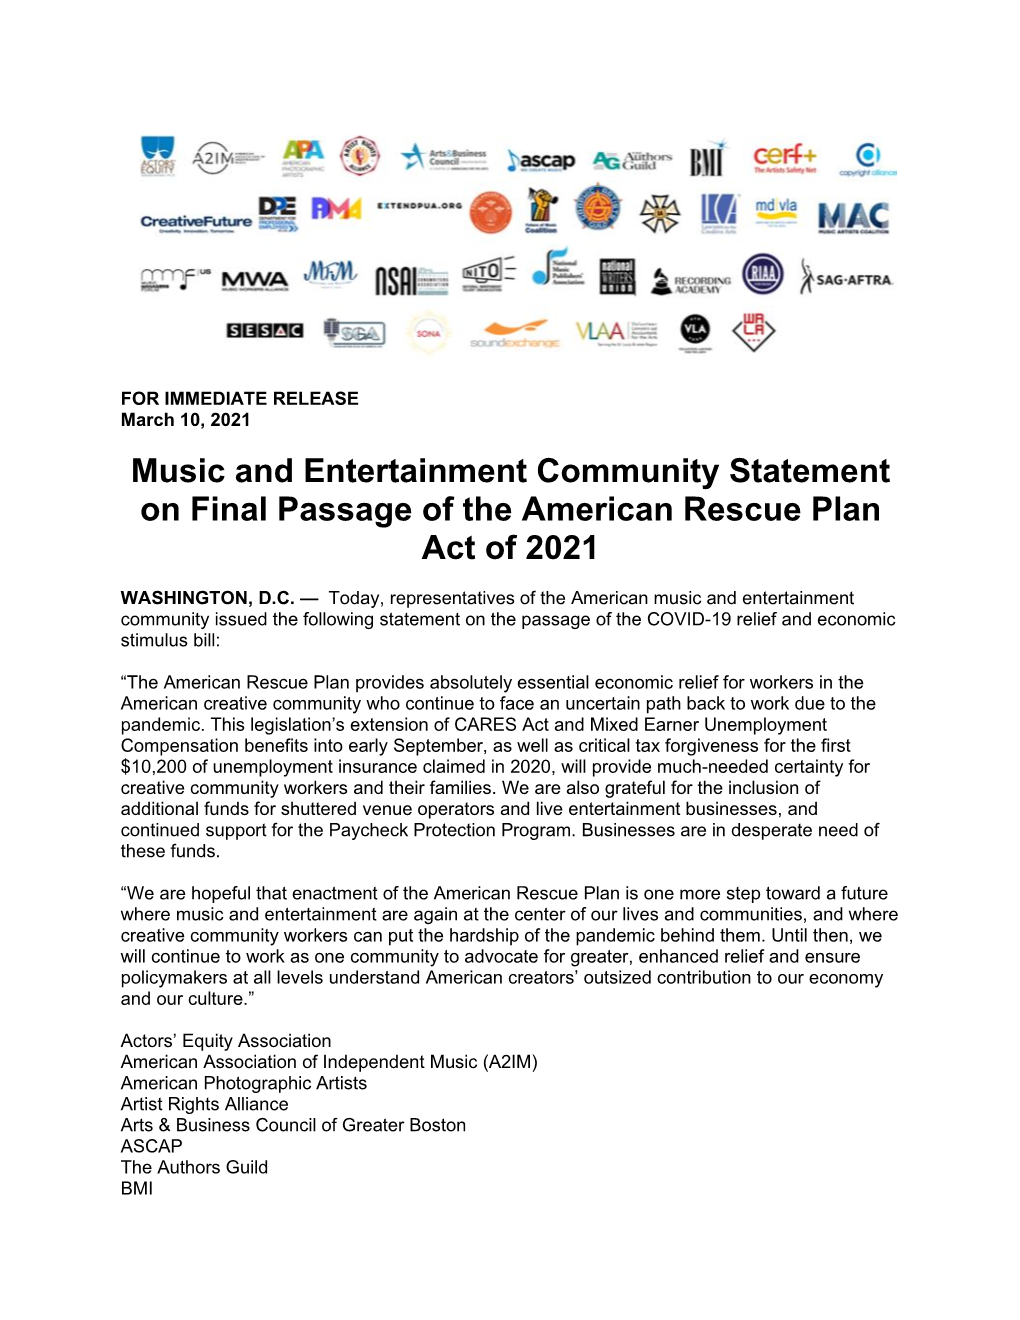 Music and Entertainment Community Statement on Final Passage of the American Rescue Plan Act of 2021